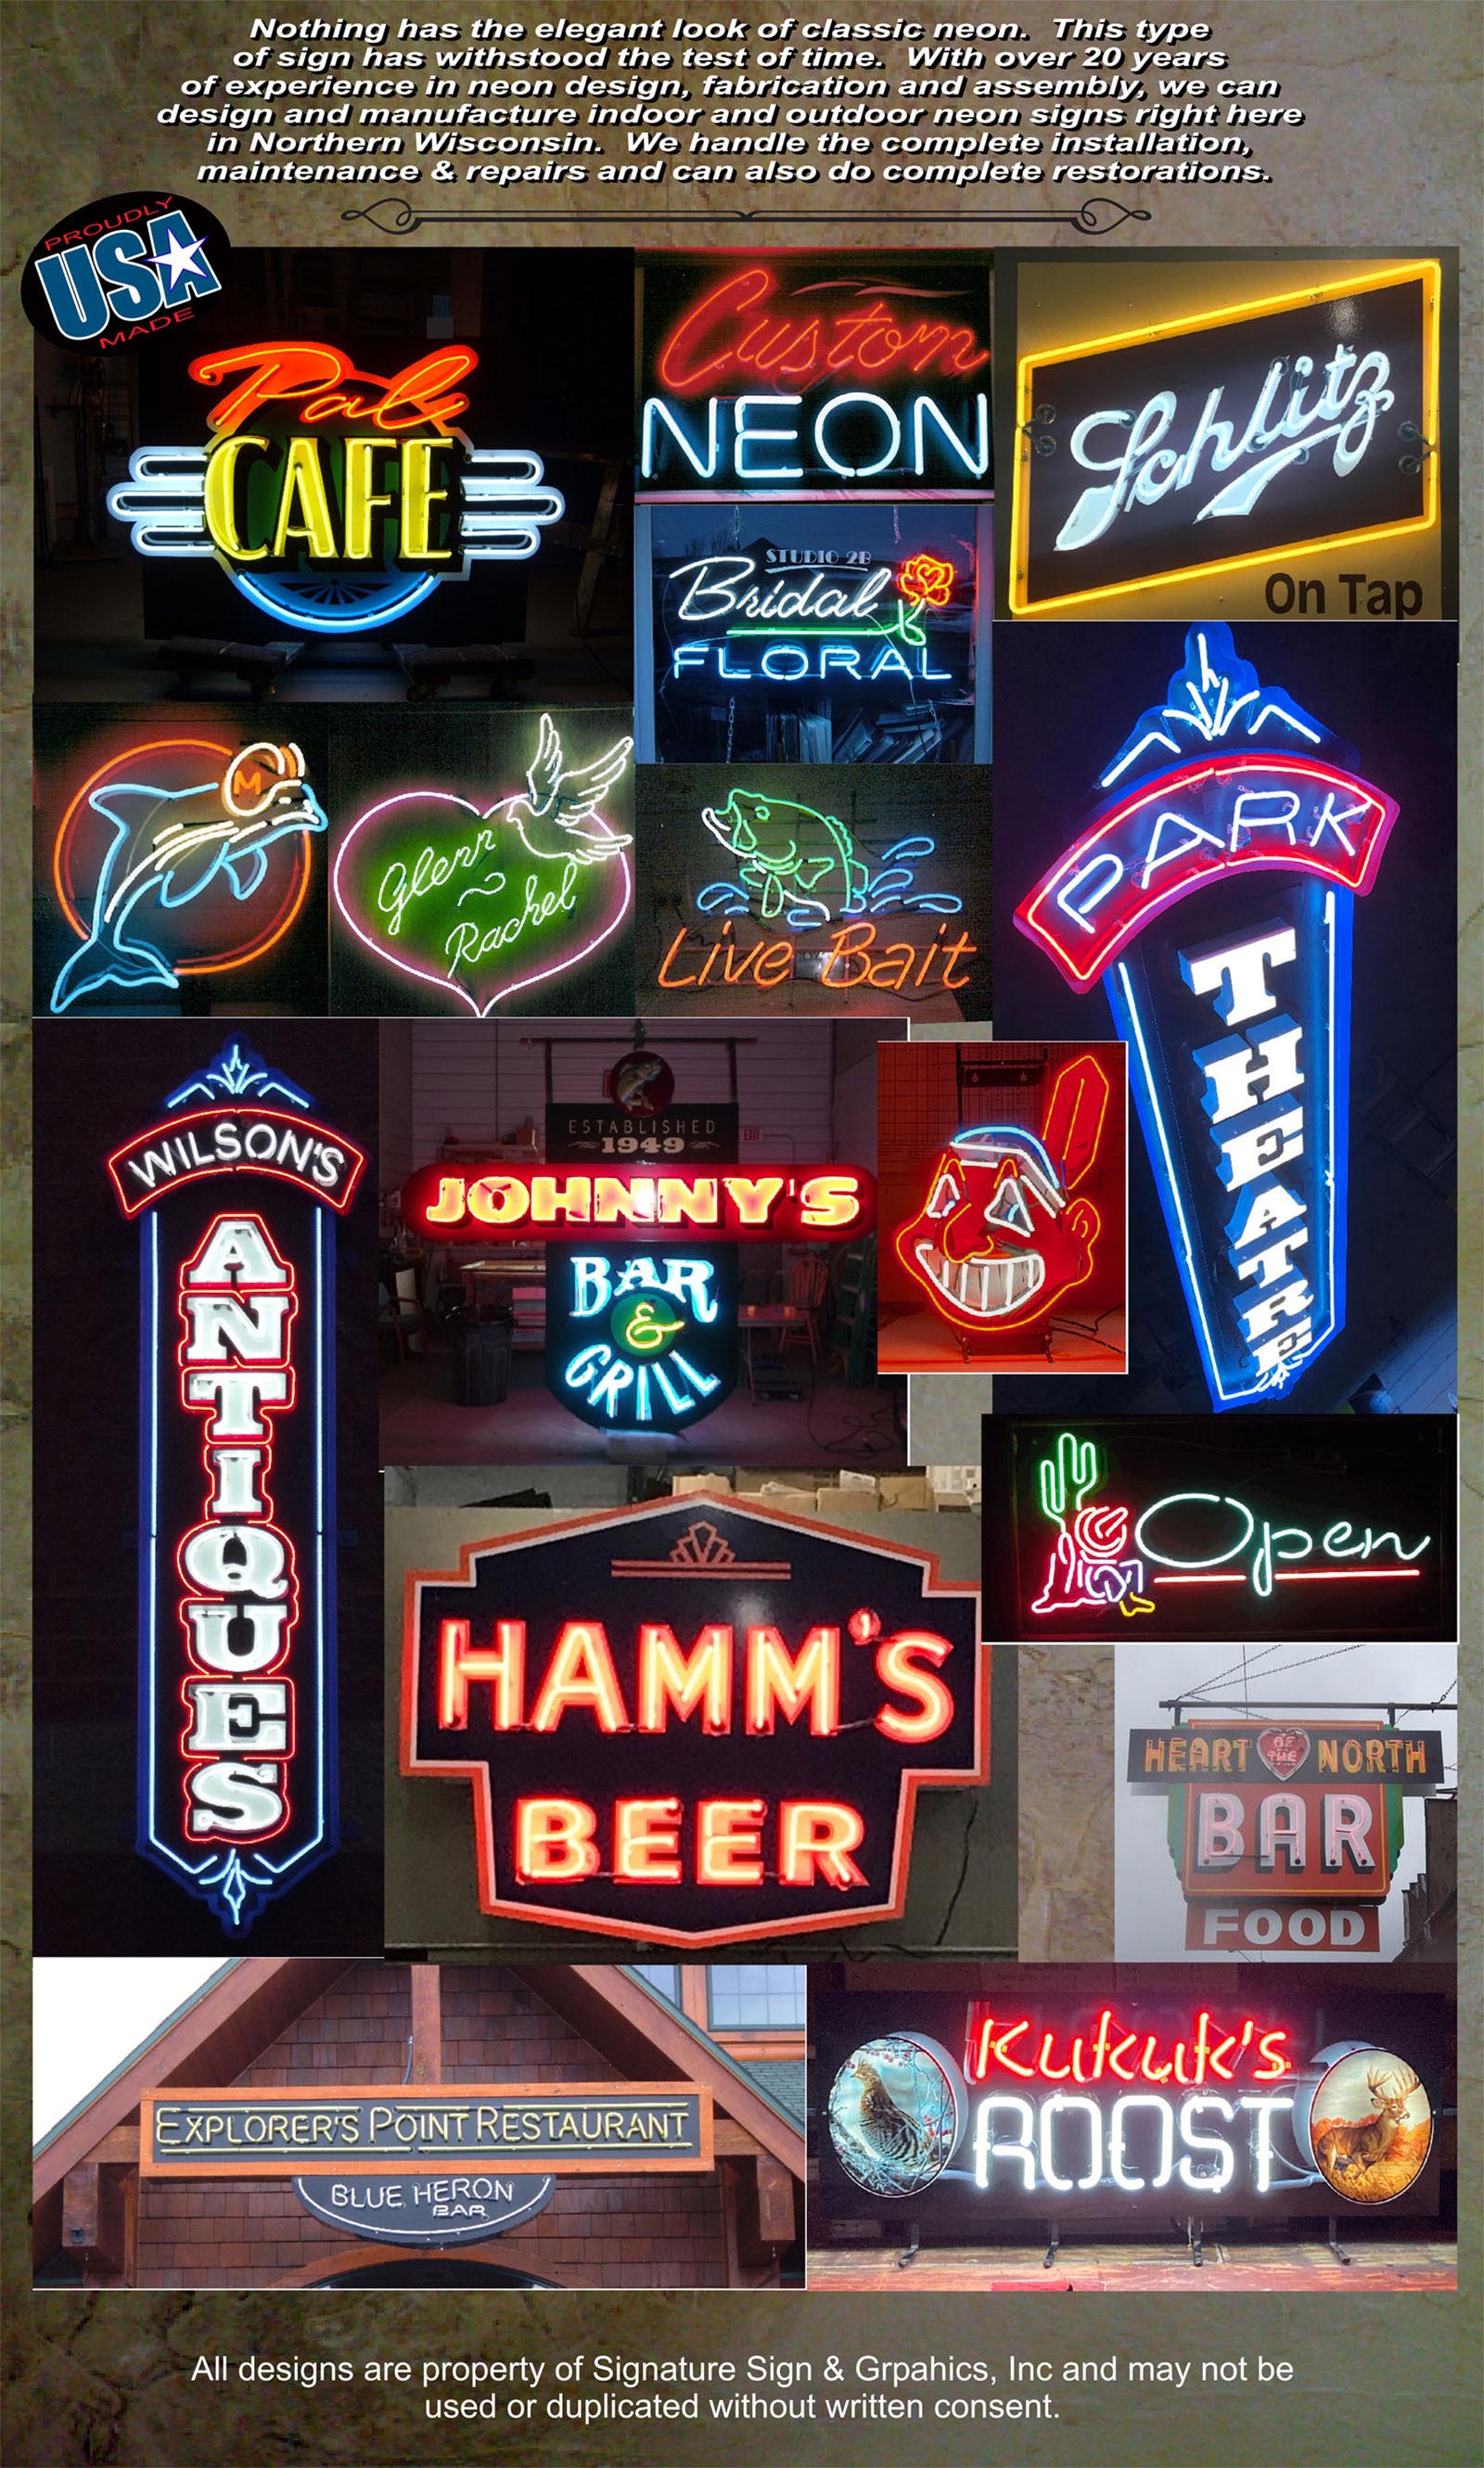 Custom signs. Signage. Sign repair. Sign installation. Neop signs. LED signs. Pylon signs. Backlit signs. Backlit cabinet signs. Sandblasted signs. Routed signs. Carved signs, panel signs, sign extrusion, plastic face signs, painted signs, flourescent signs, HDU signs, plastic letters, metal letters. Formed plastic letter, banner, billboards, road arrows, vehicle graphics, post and panel signs, site surveys, commercial signs.